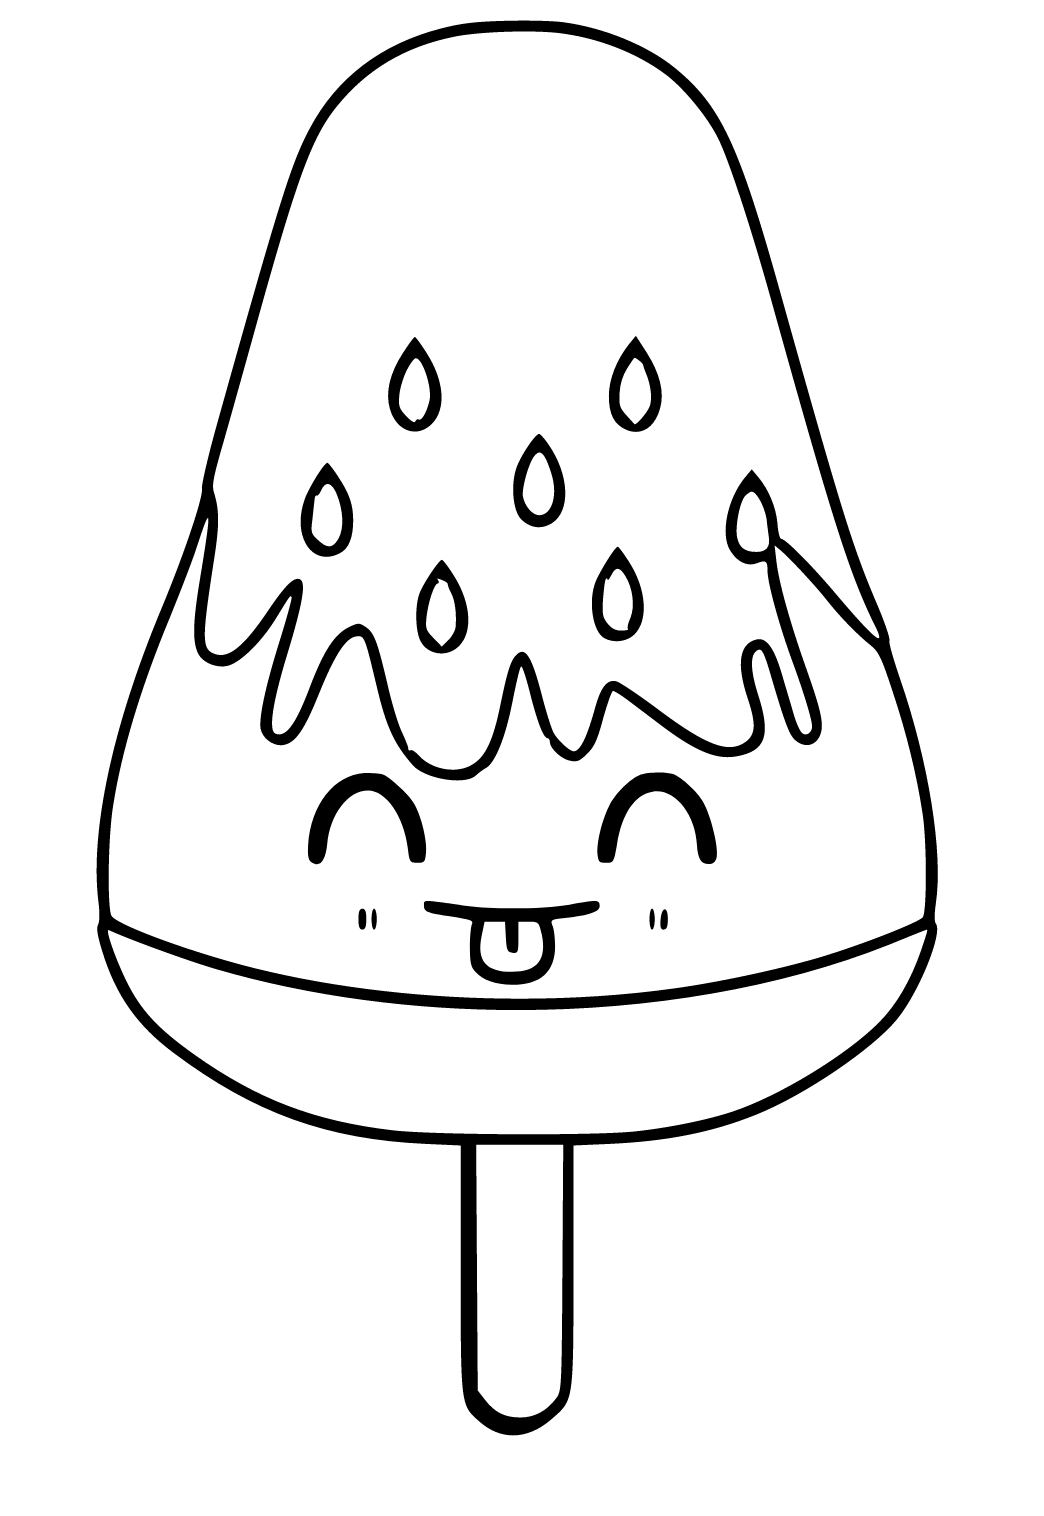 Free printable popsicle cute coloring page for adults and kids